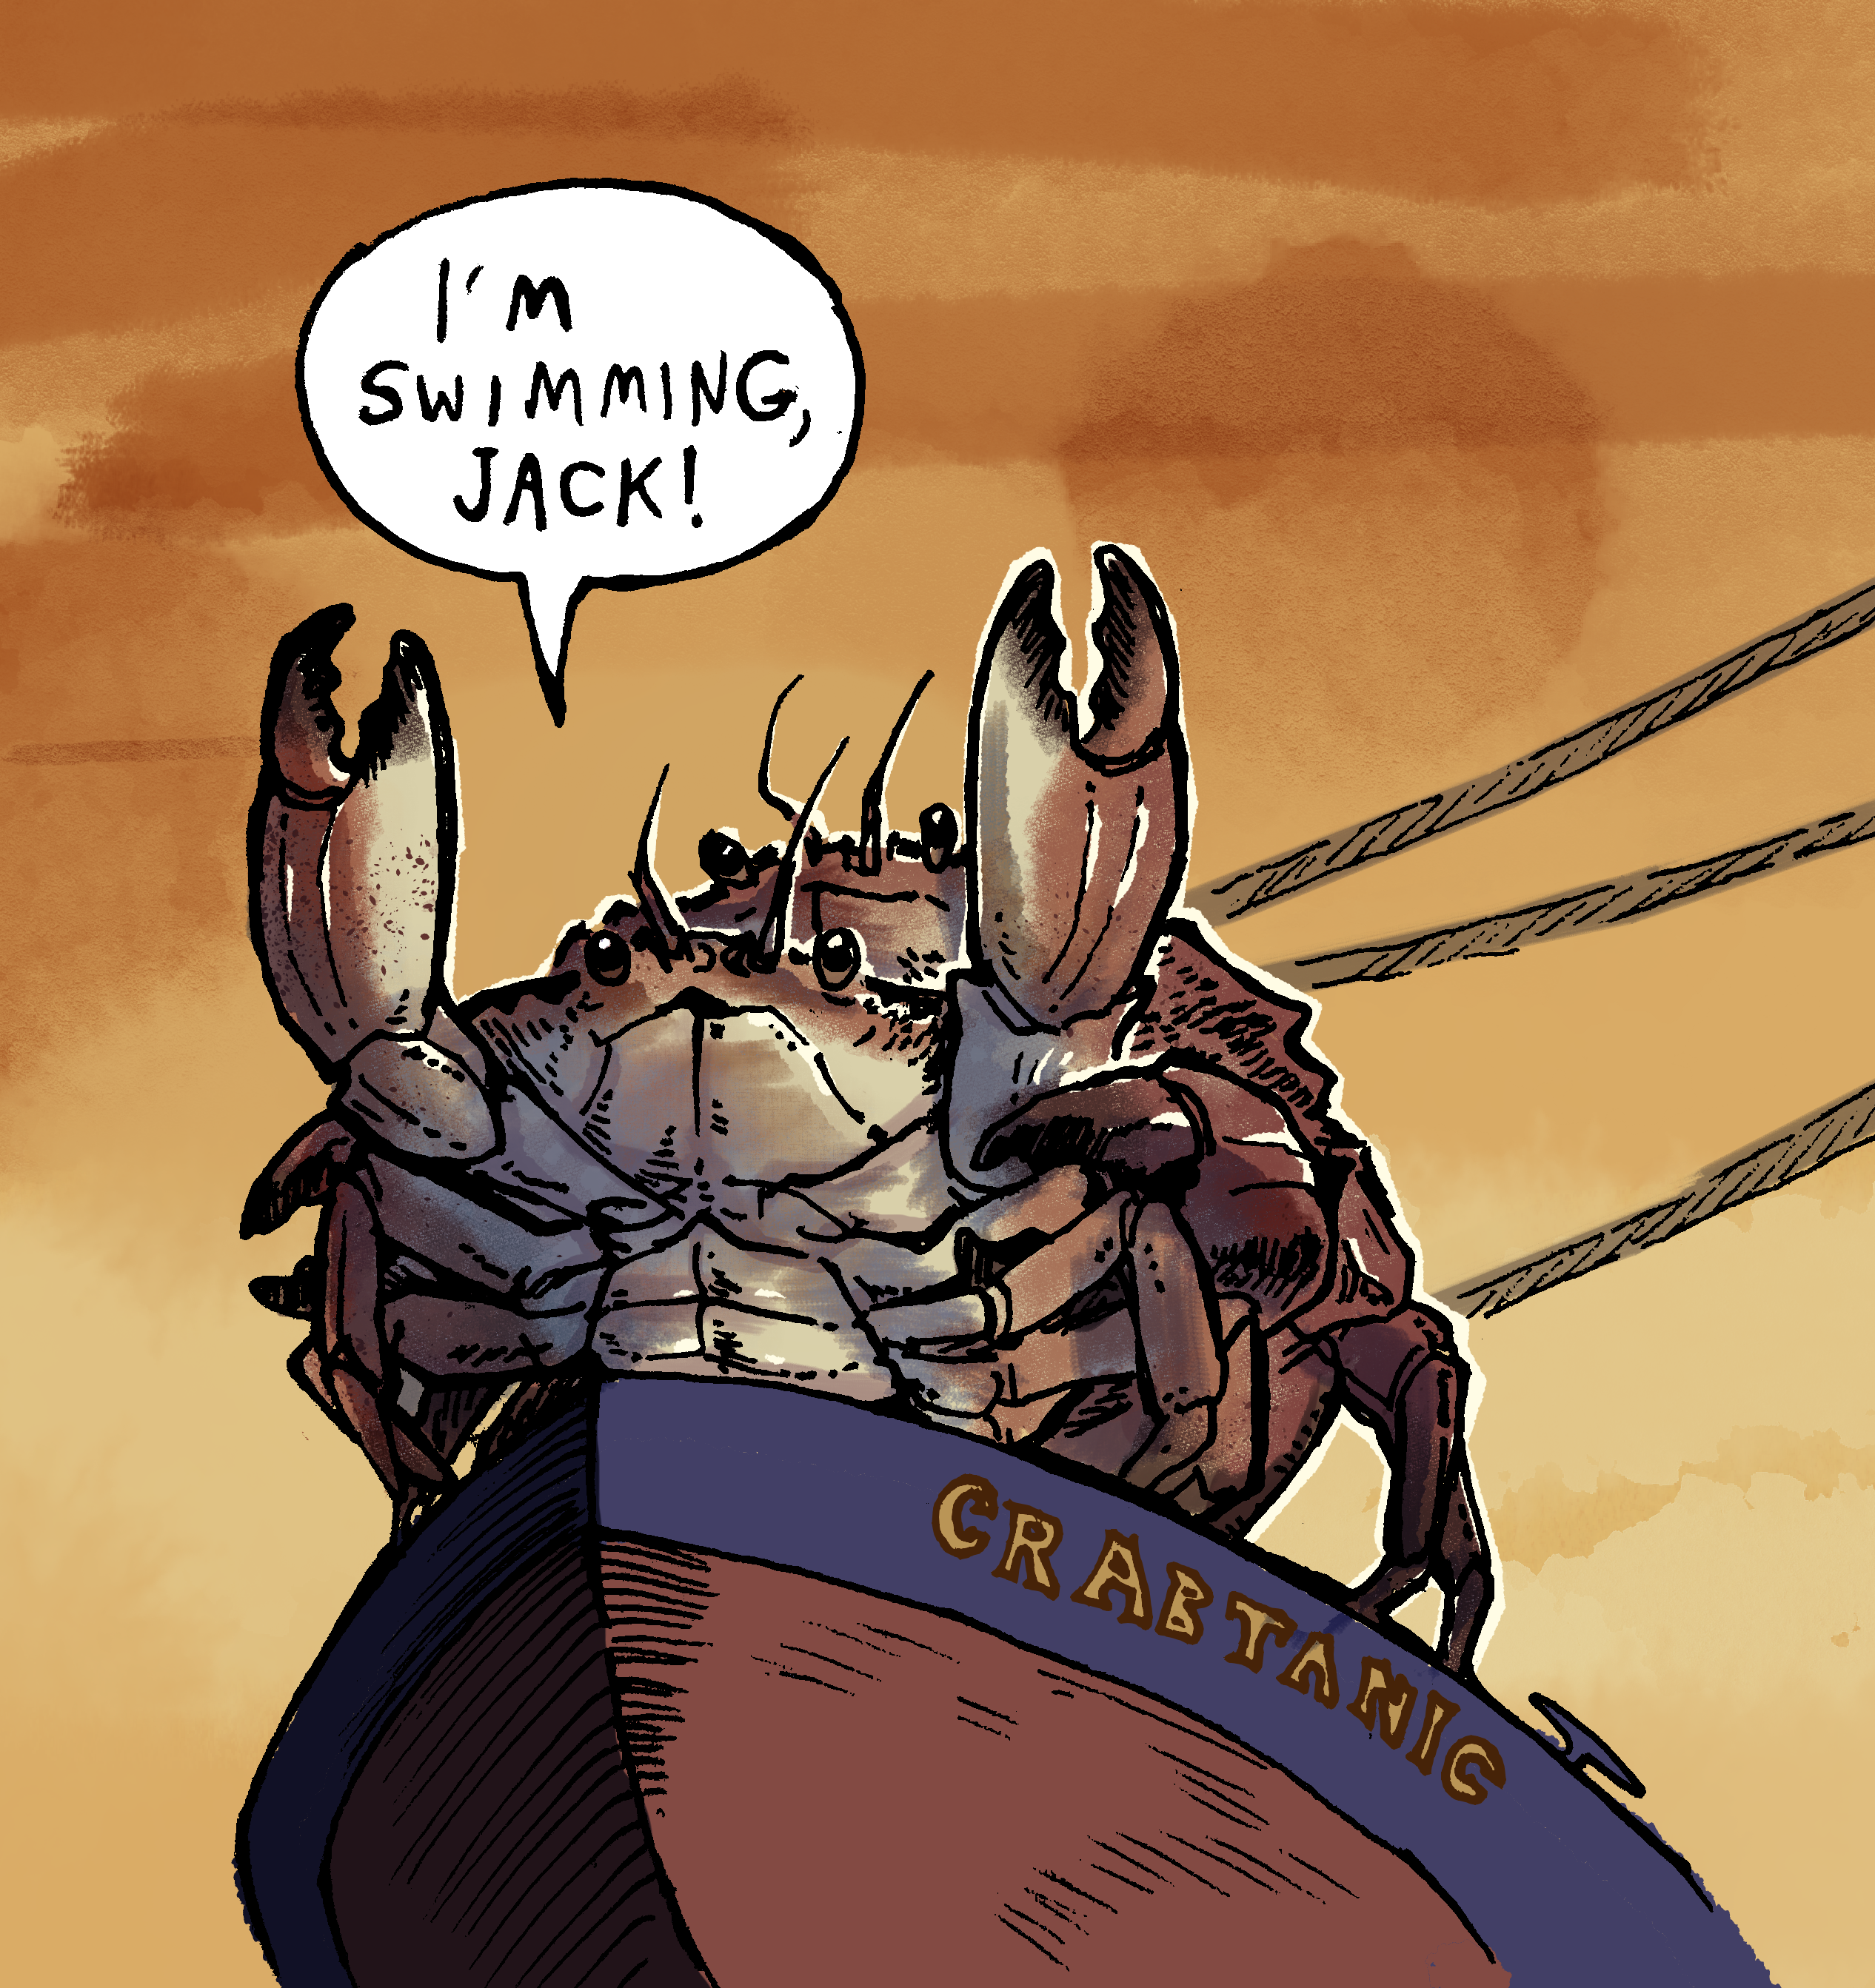 Two crabs embrace at the bow of a ship titled "Crabtanic."